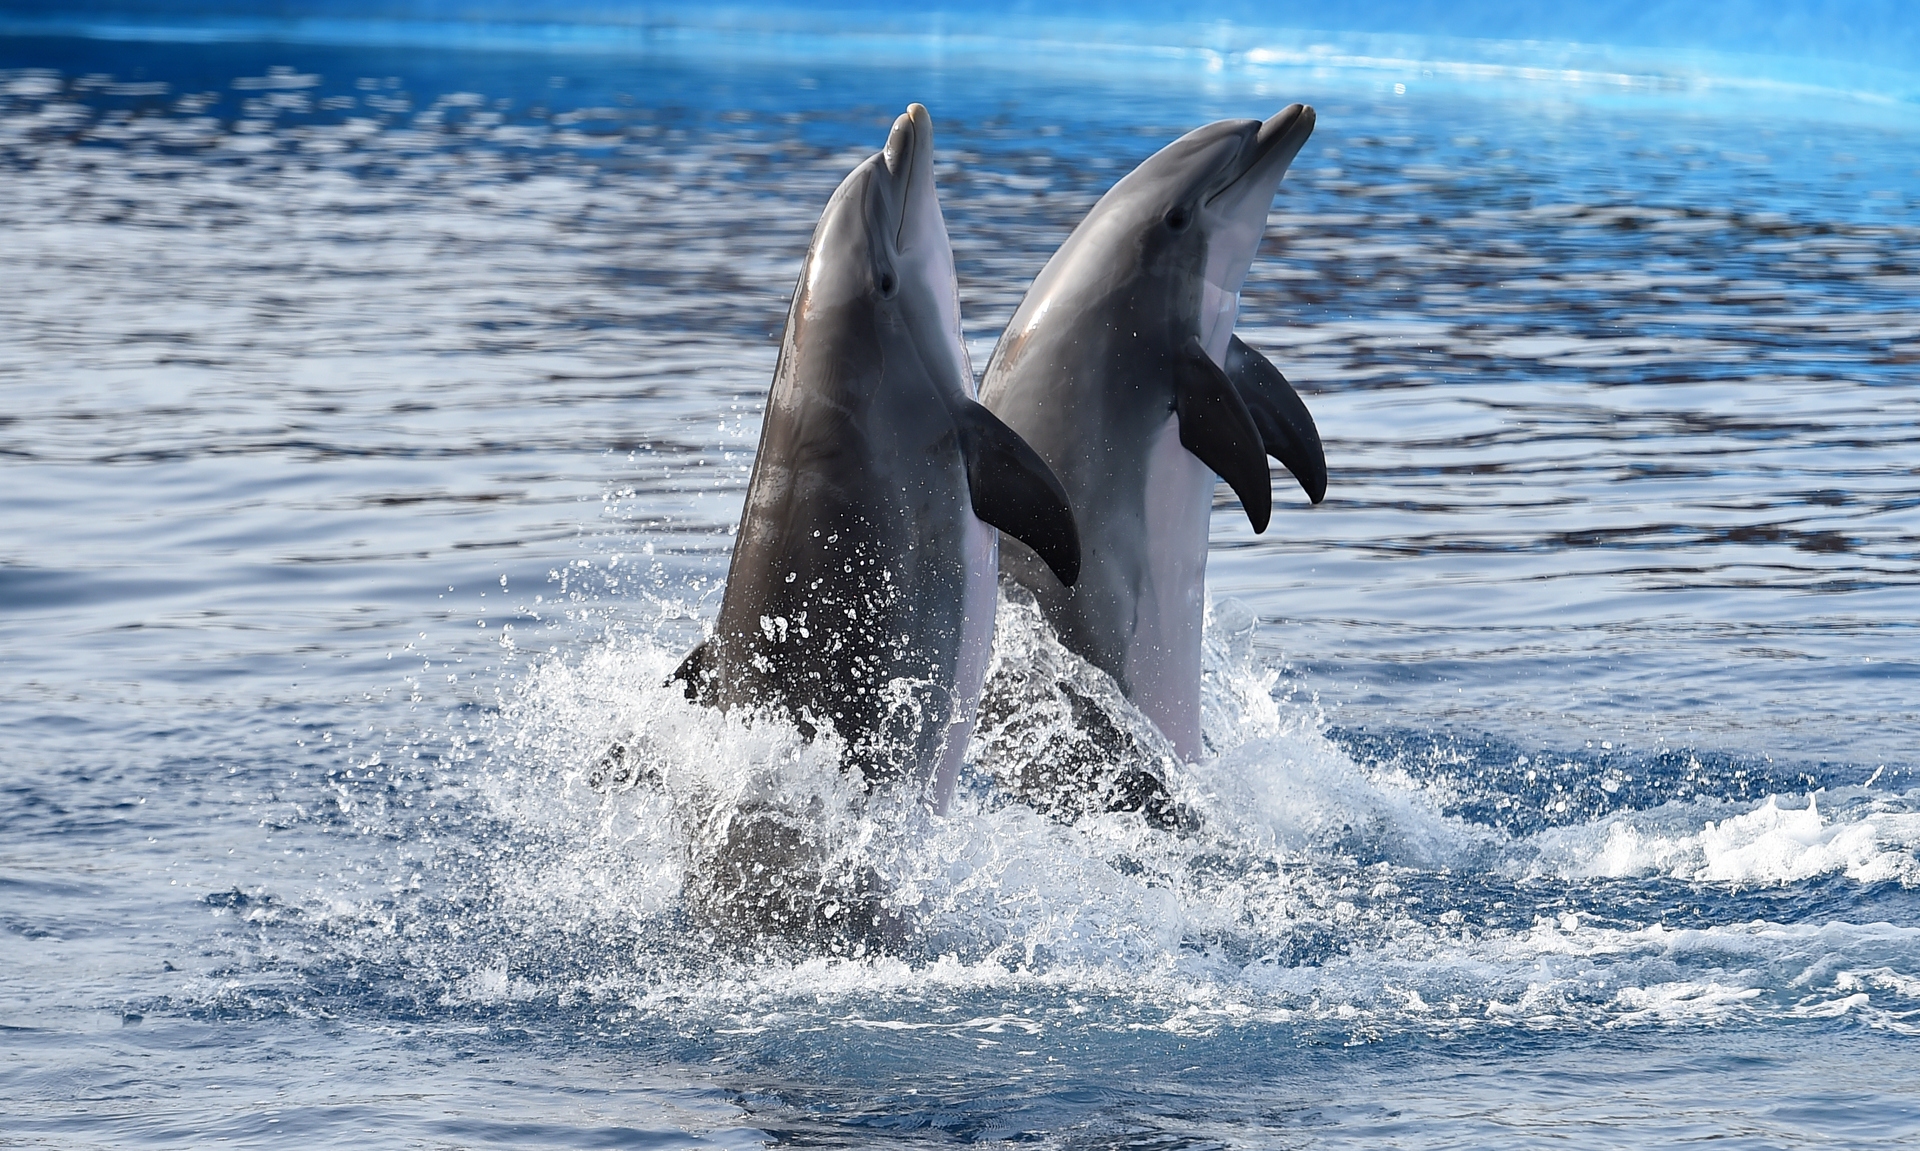 A lot of dolphin activity was detected - more than researchers expected. 